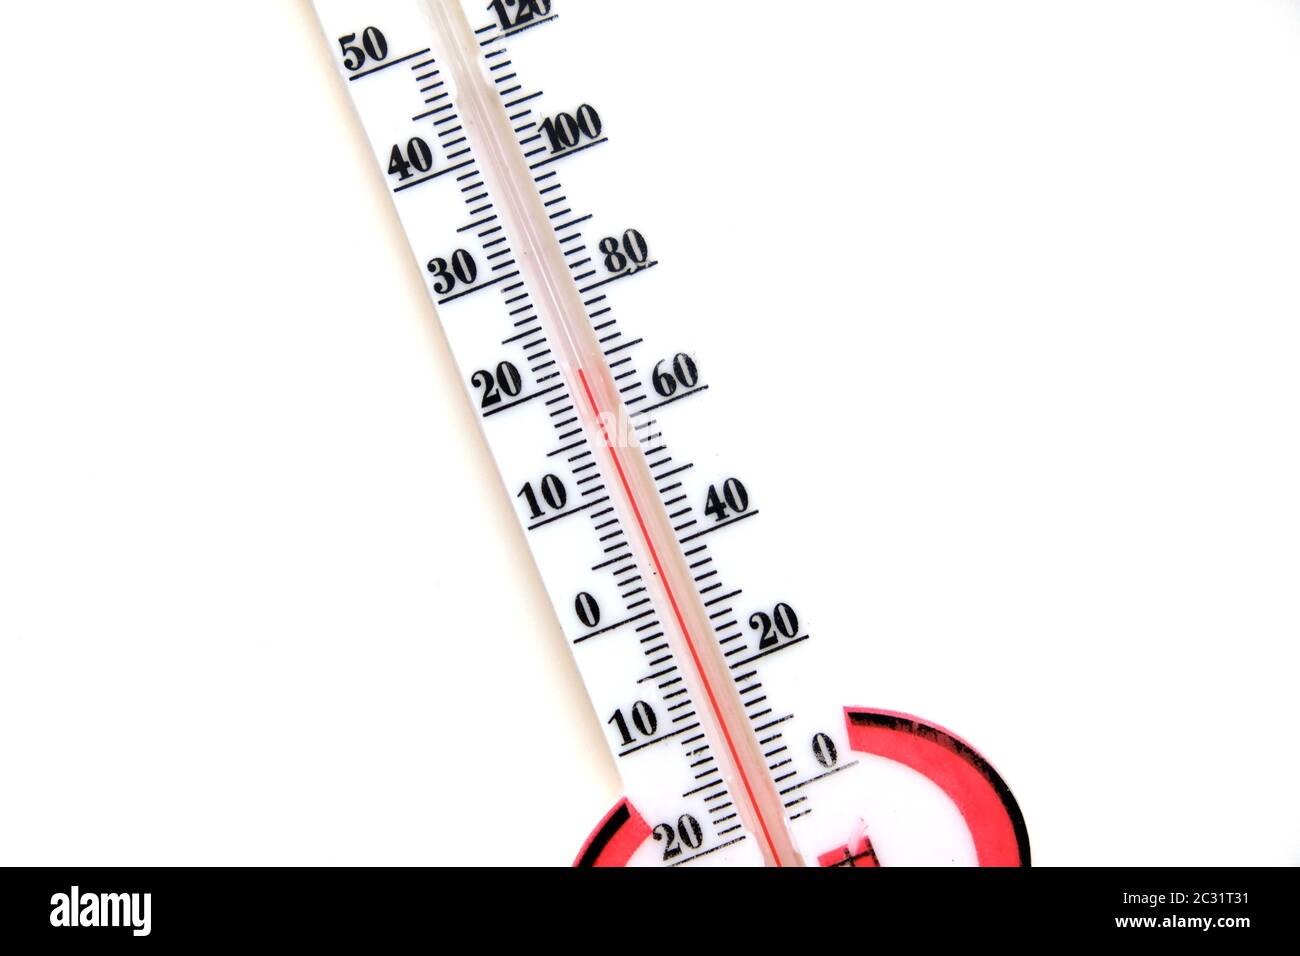 https://c8.alamy.com/comp/2C31T31/mercury-room-thermometer-household-heat-thermometer-temperature-rising-close-up-2C31T31.jpg